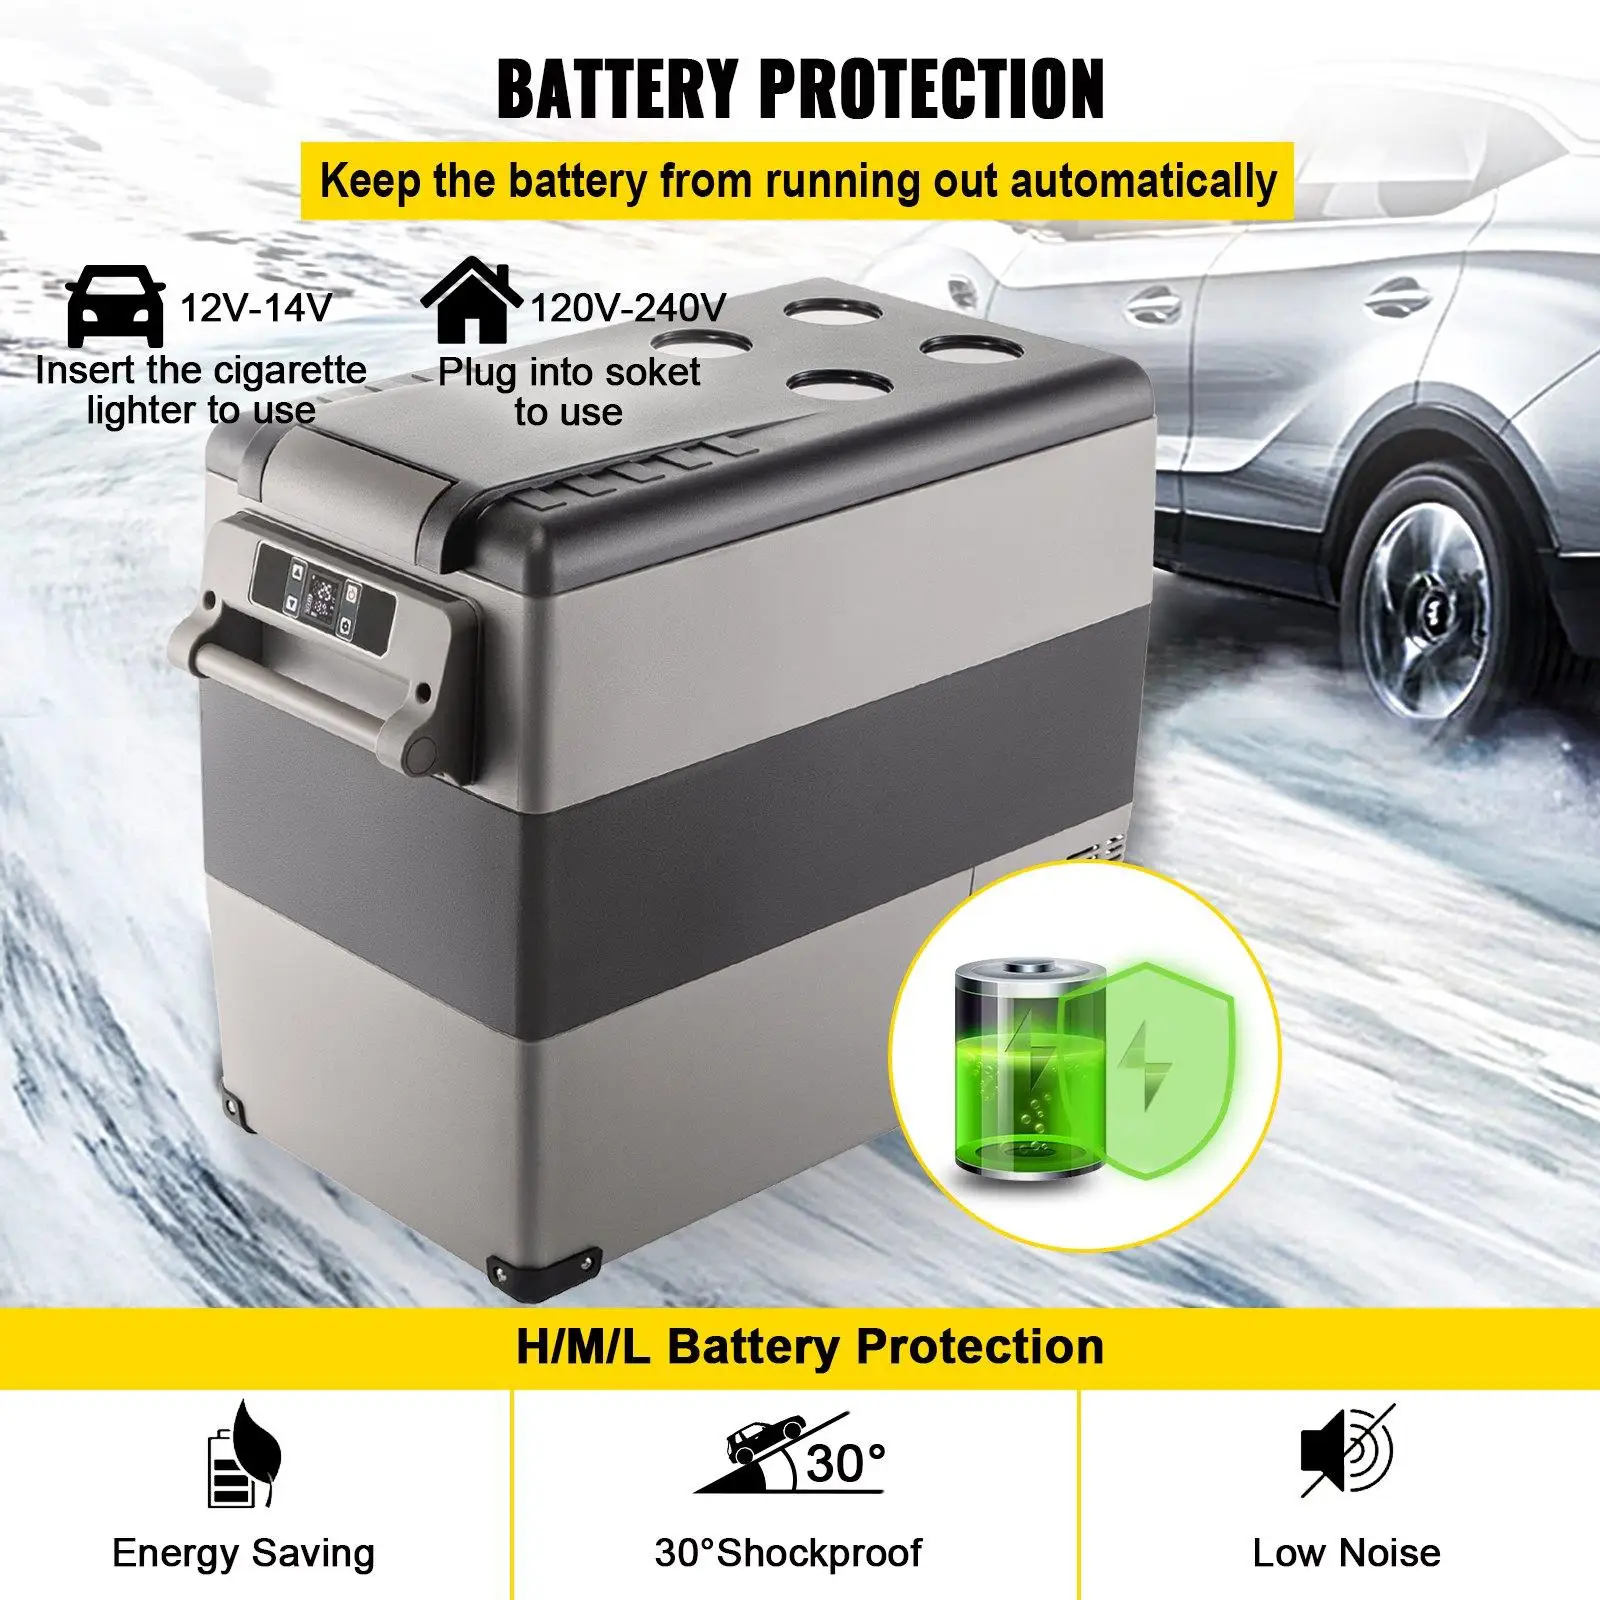 Automatic battery protection